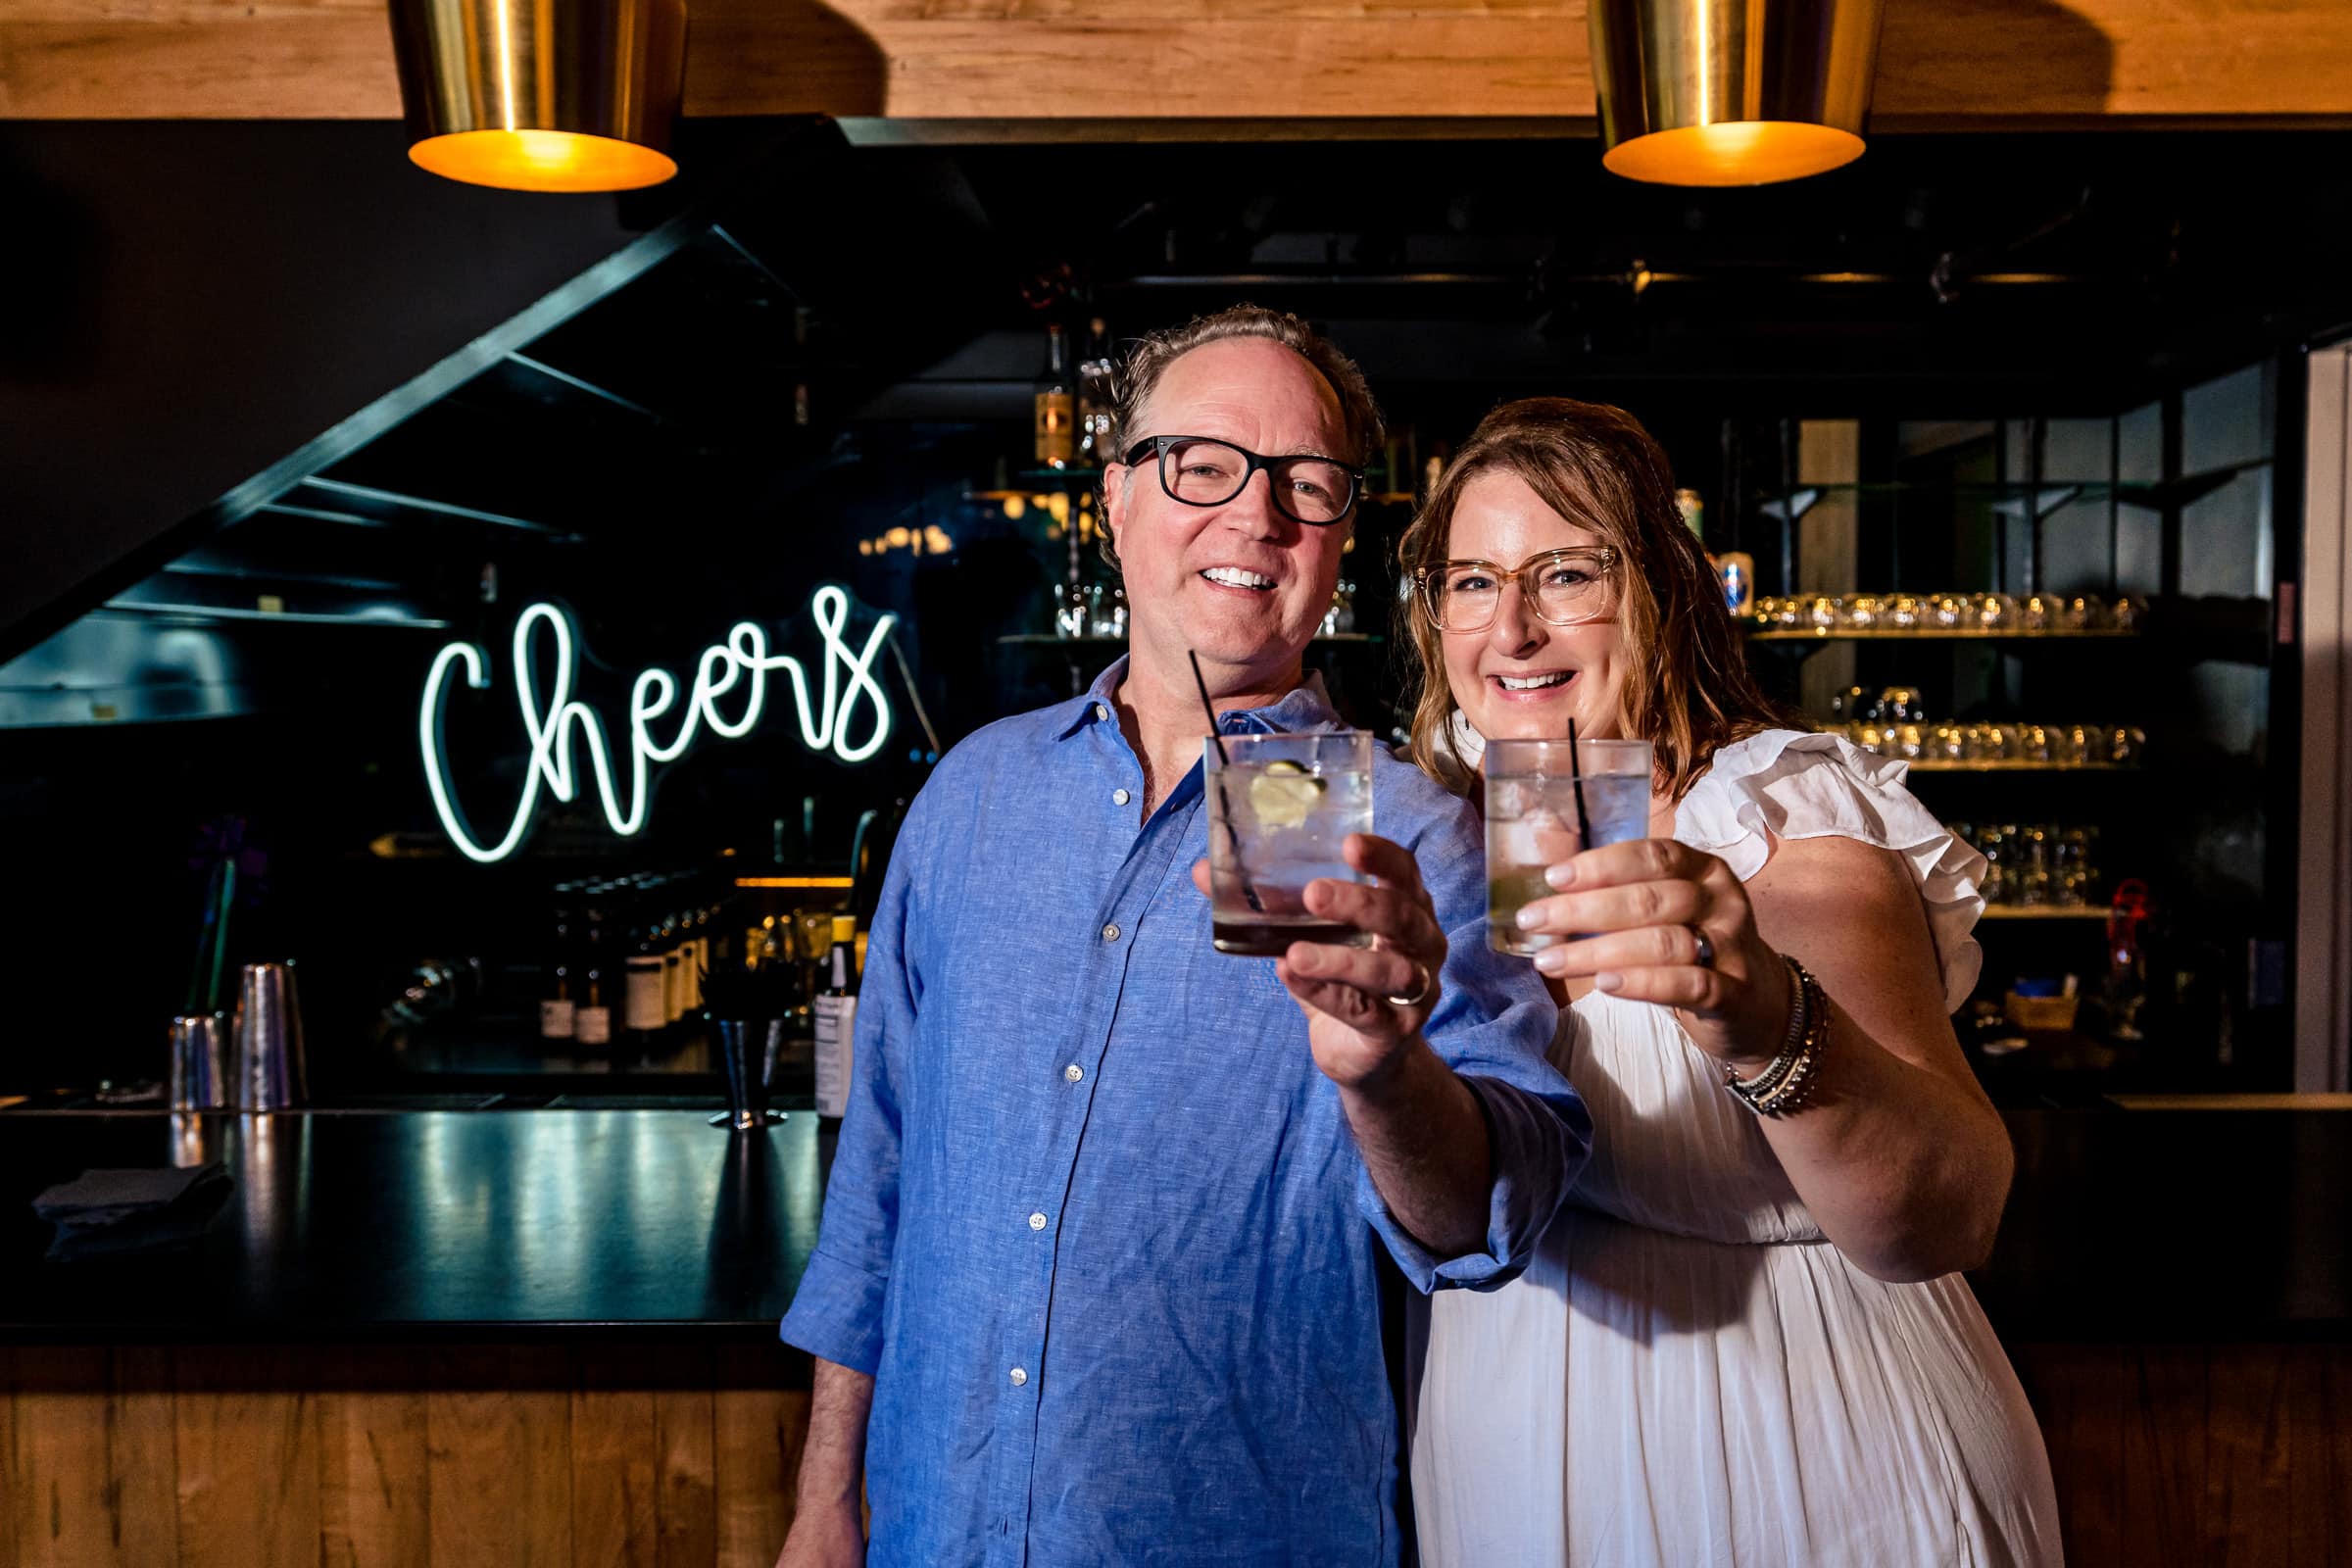 couple in casual wedding attire stands in front of a bar with a neon sign that says "Cheers" and the couple is holding their drinks out toward the camera | photo by Kivus & Camera